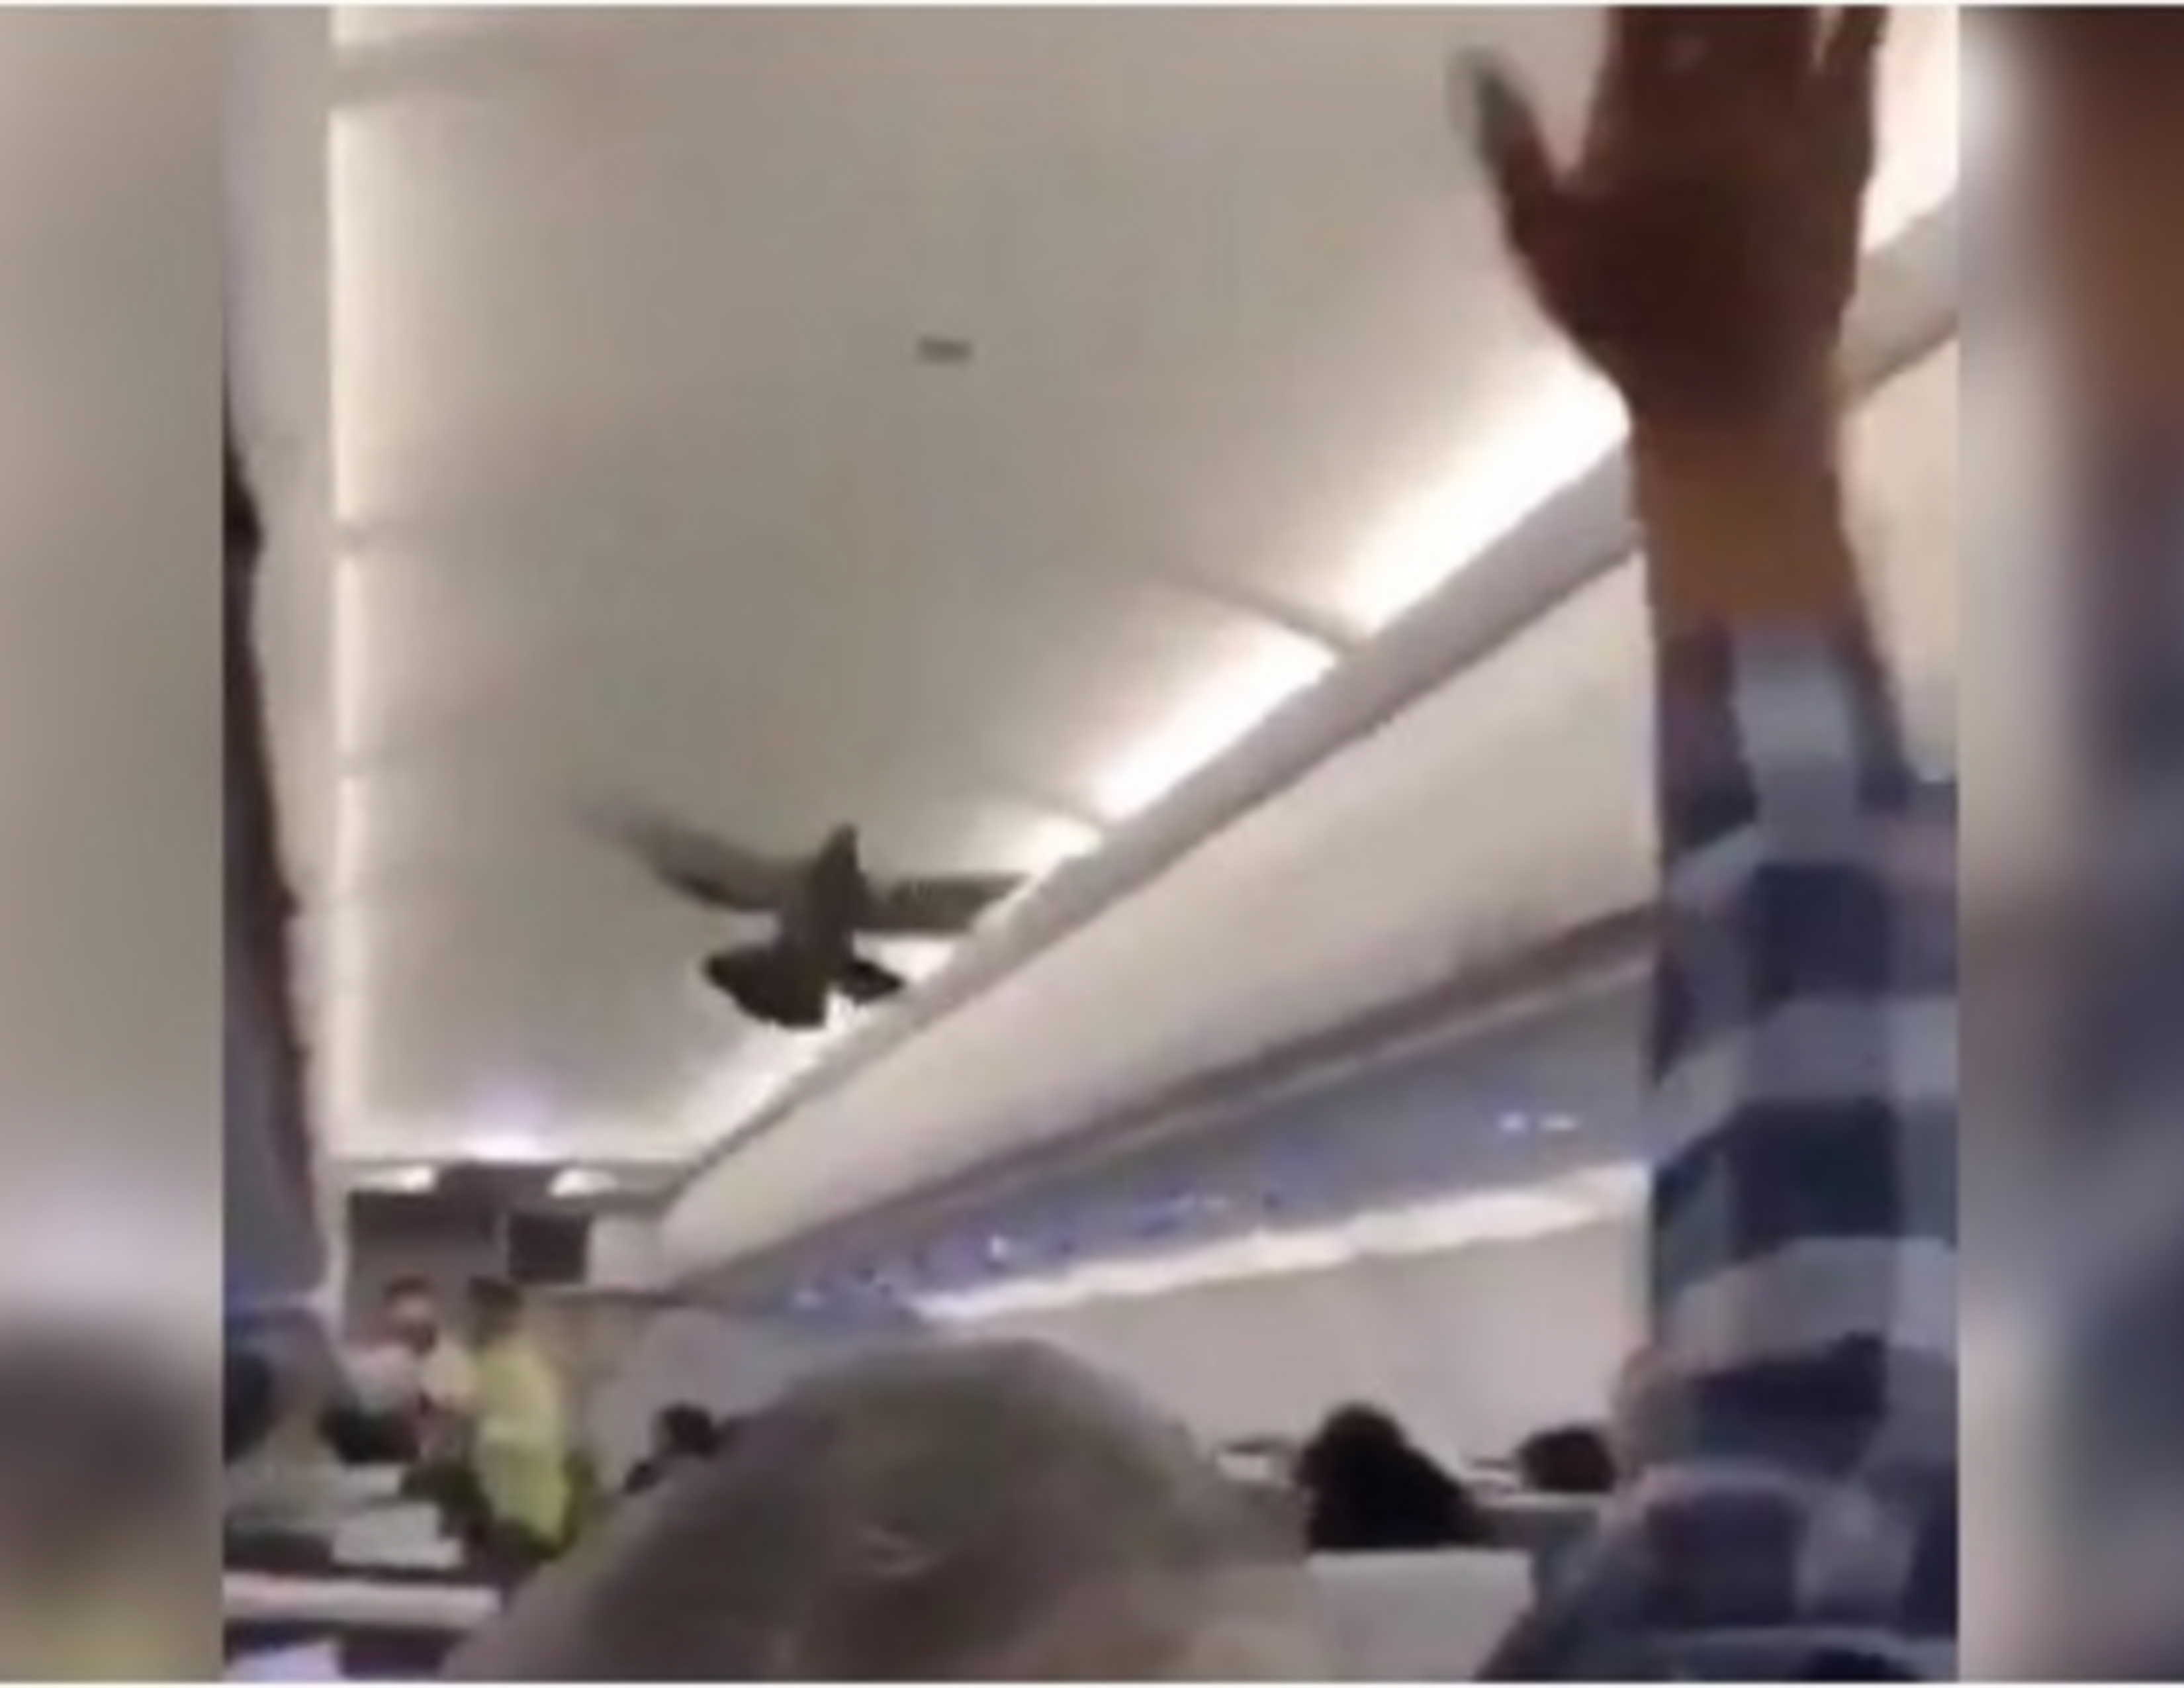 PIGEON ON A PLANE: Bored Pigeons Fly Into A Plane In India For Another Viral Video